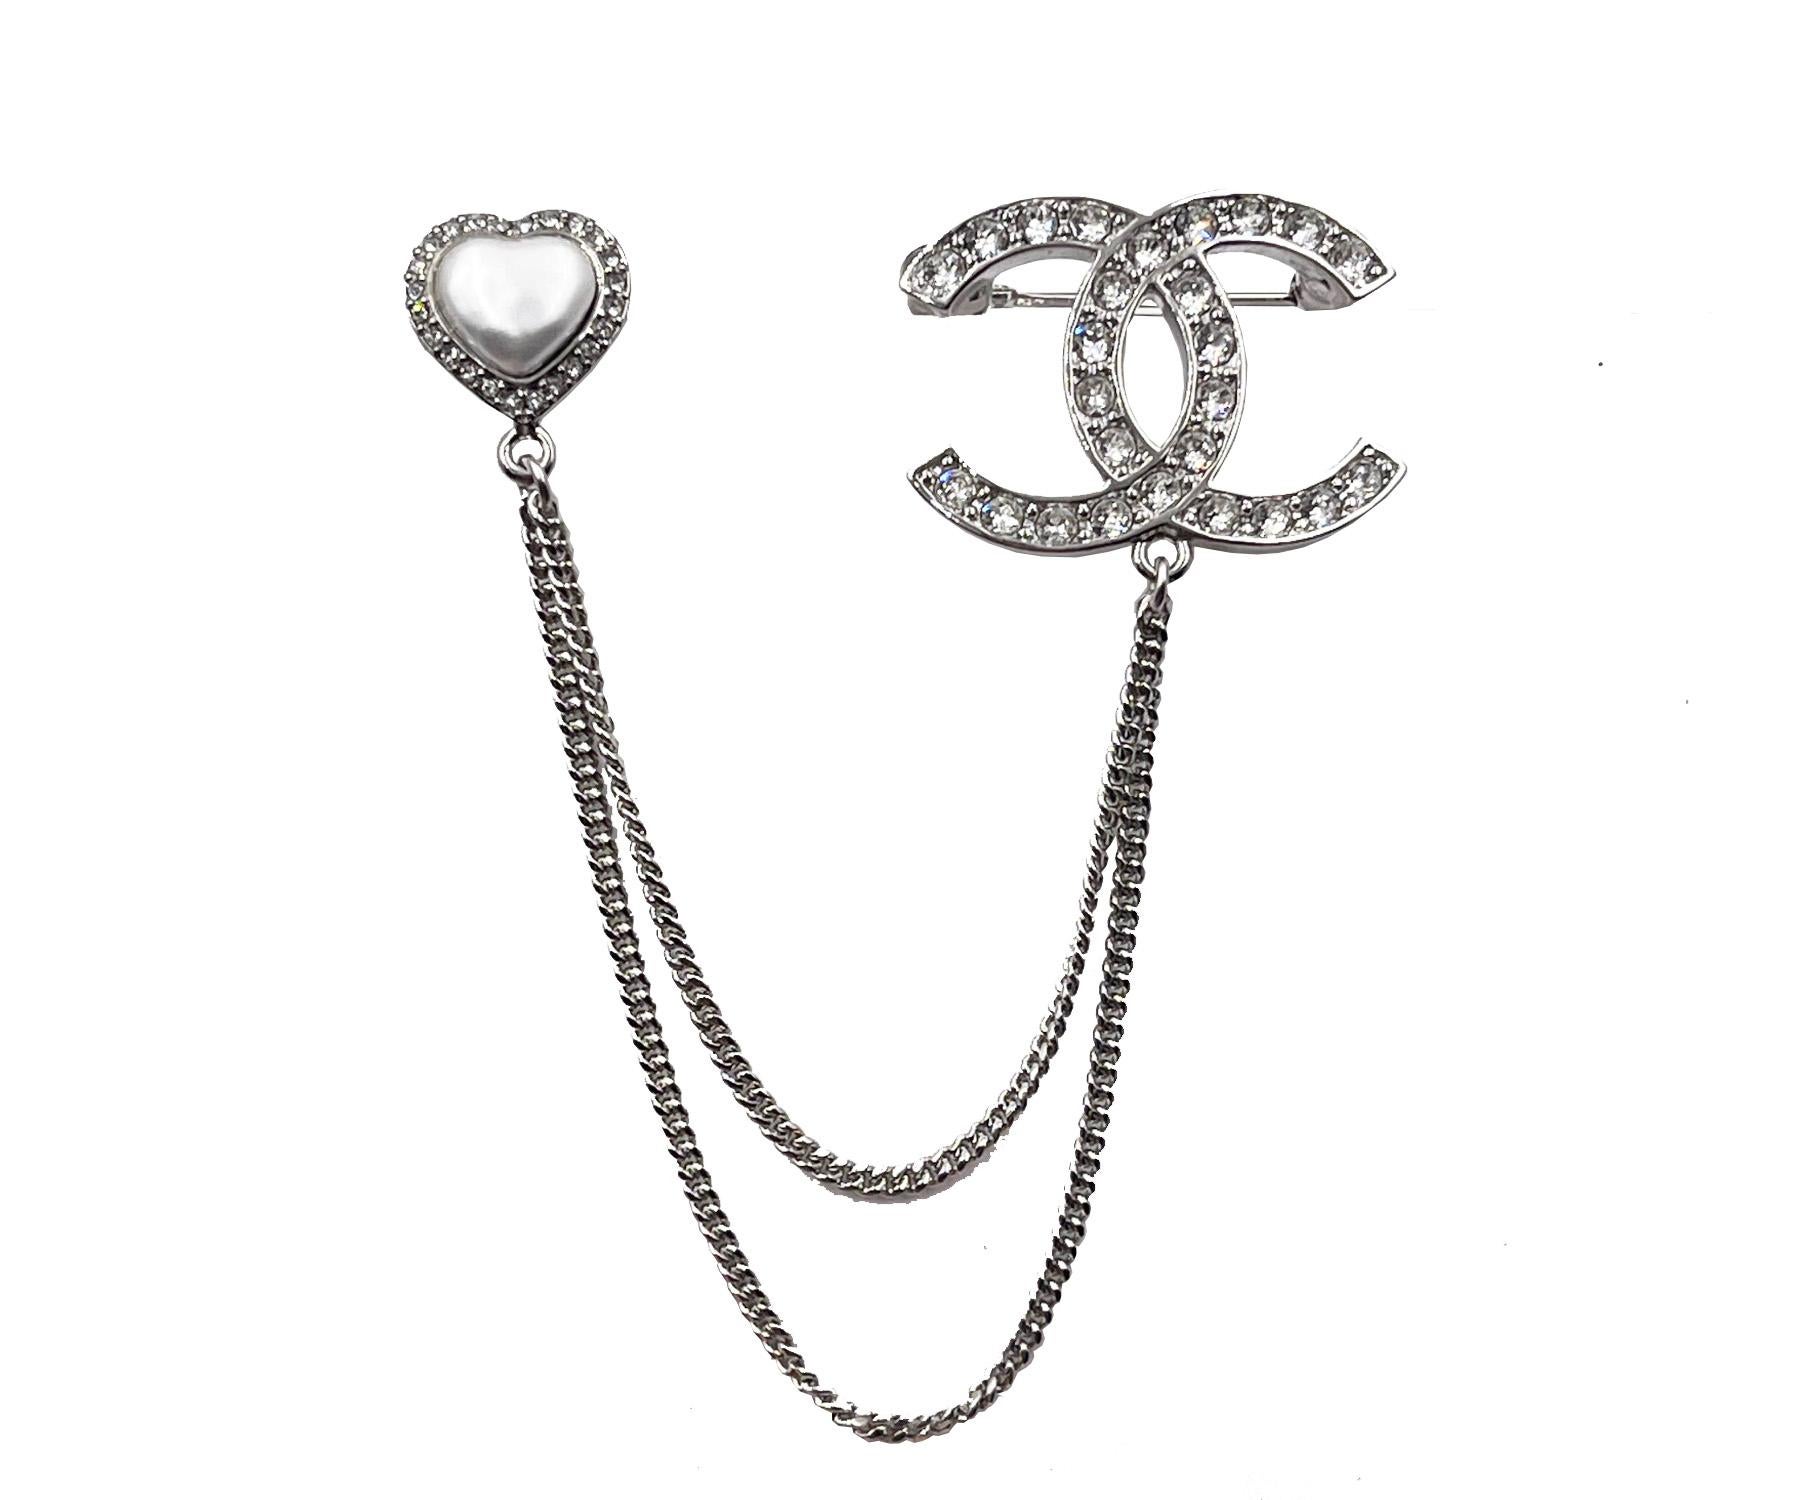 Chanel Brand New Silver CC crystal Heart Pin Link Brooch

* Marked 23
* Made in Italy
*Comes with the original box, pouch, tag, booklet, ribbon and camellia

-It is approximately 1.25